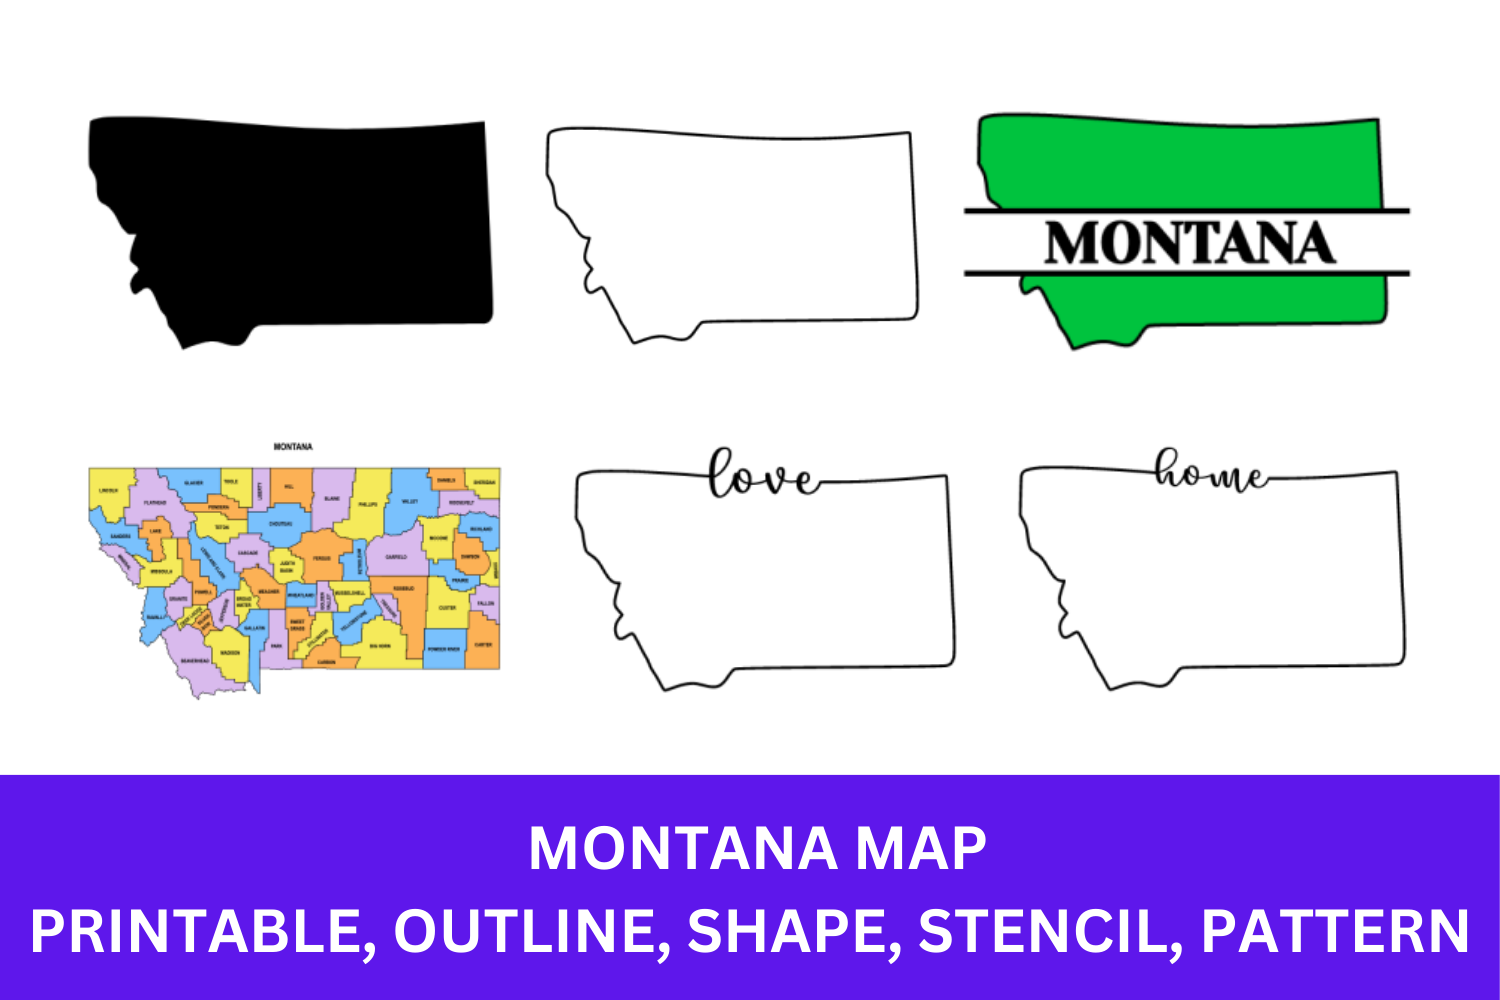 Montana Map - Outline, Printable State, Shape, Stencil, Pattern - Outline,  Printable State, Shape, Stencil, Pattern